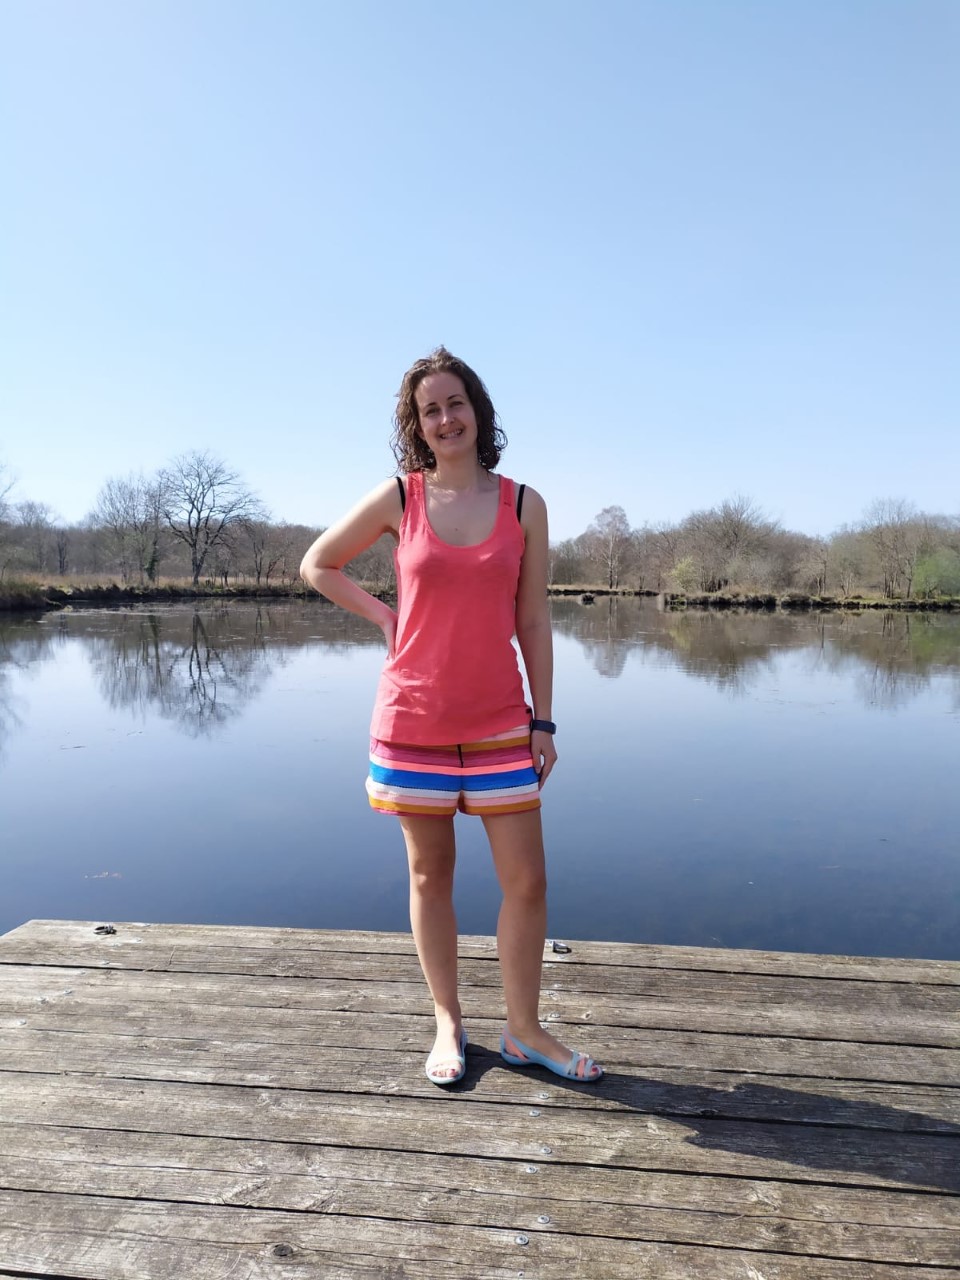 I am stood weraing a coral top and stripy shorts next to a lake